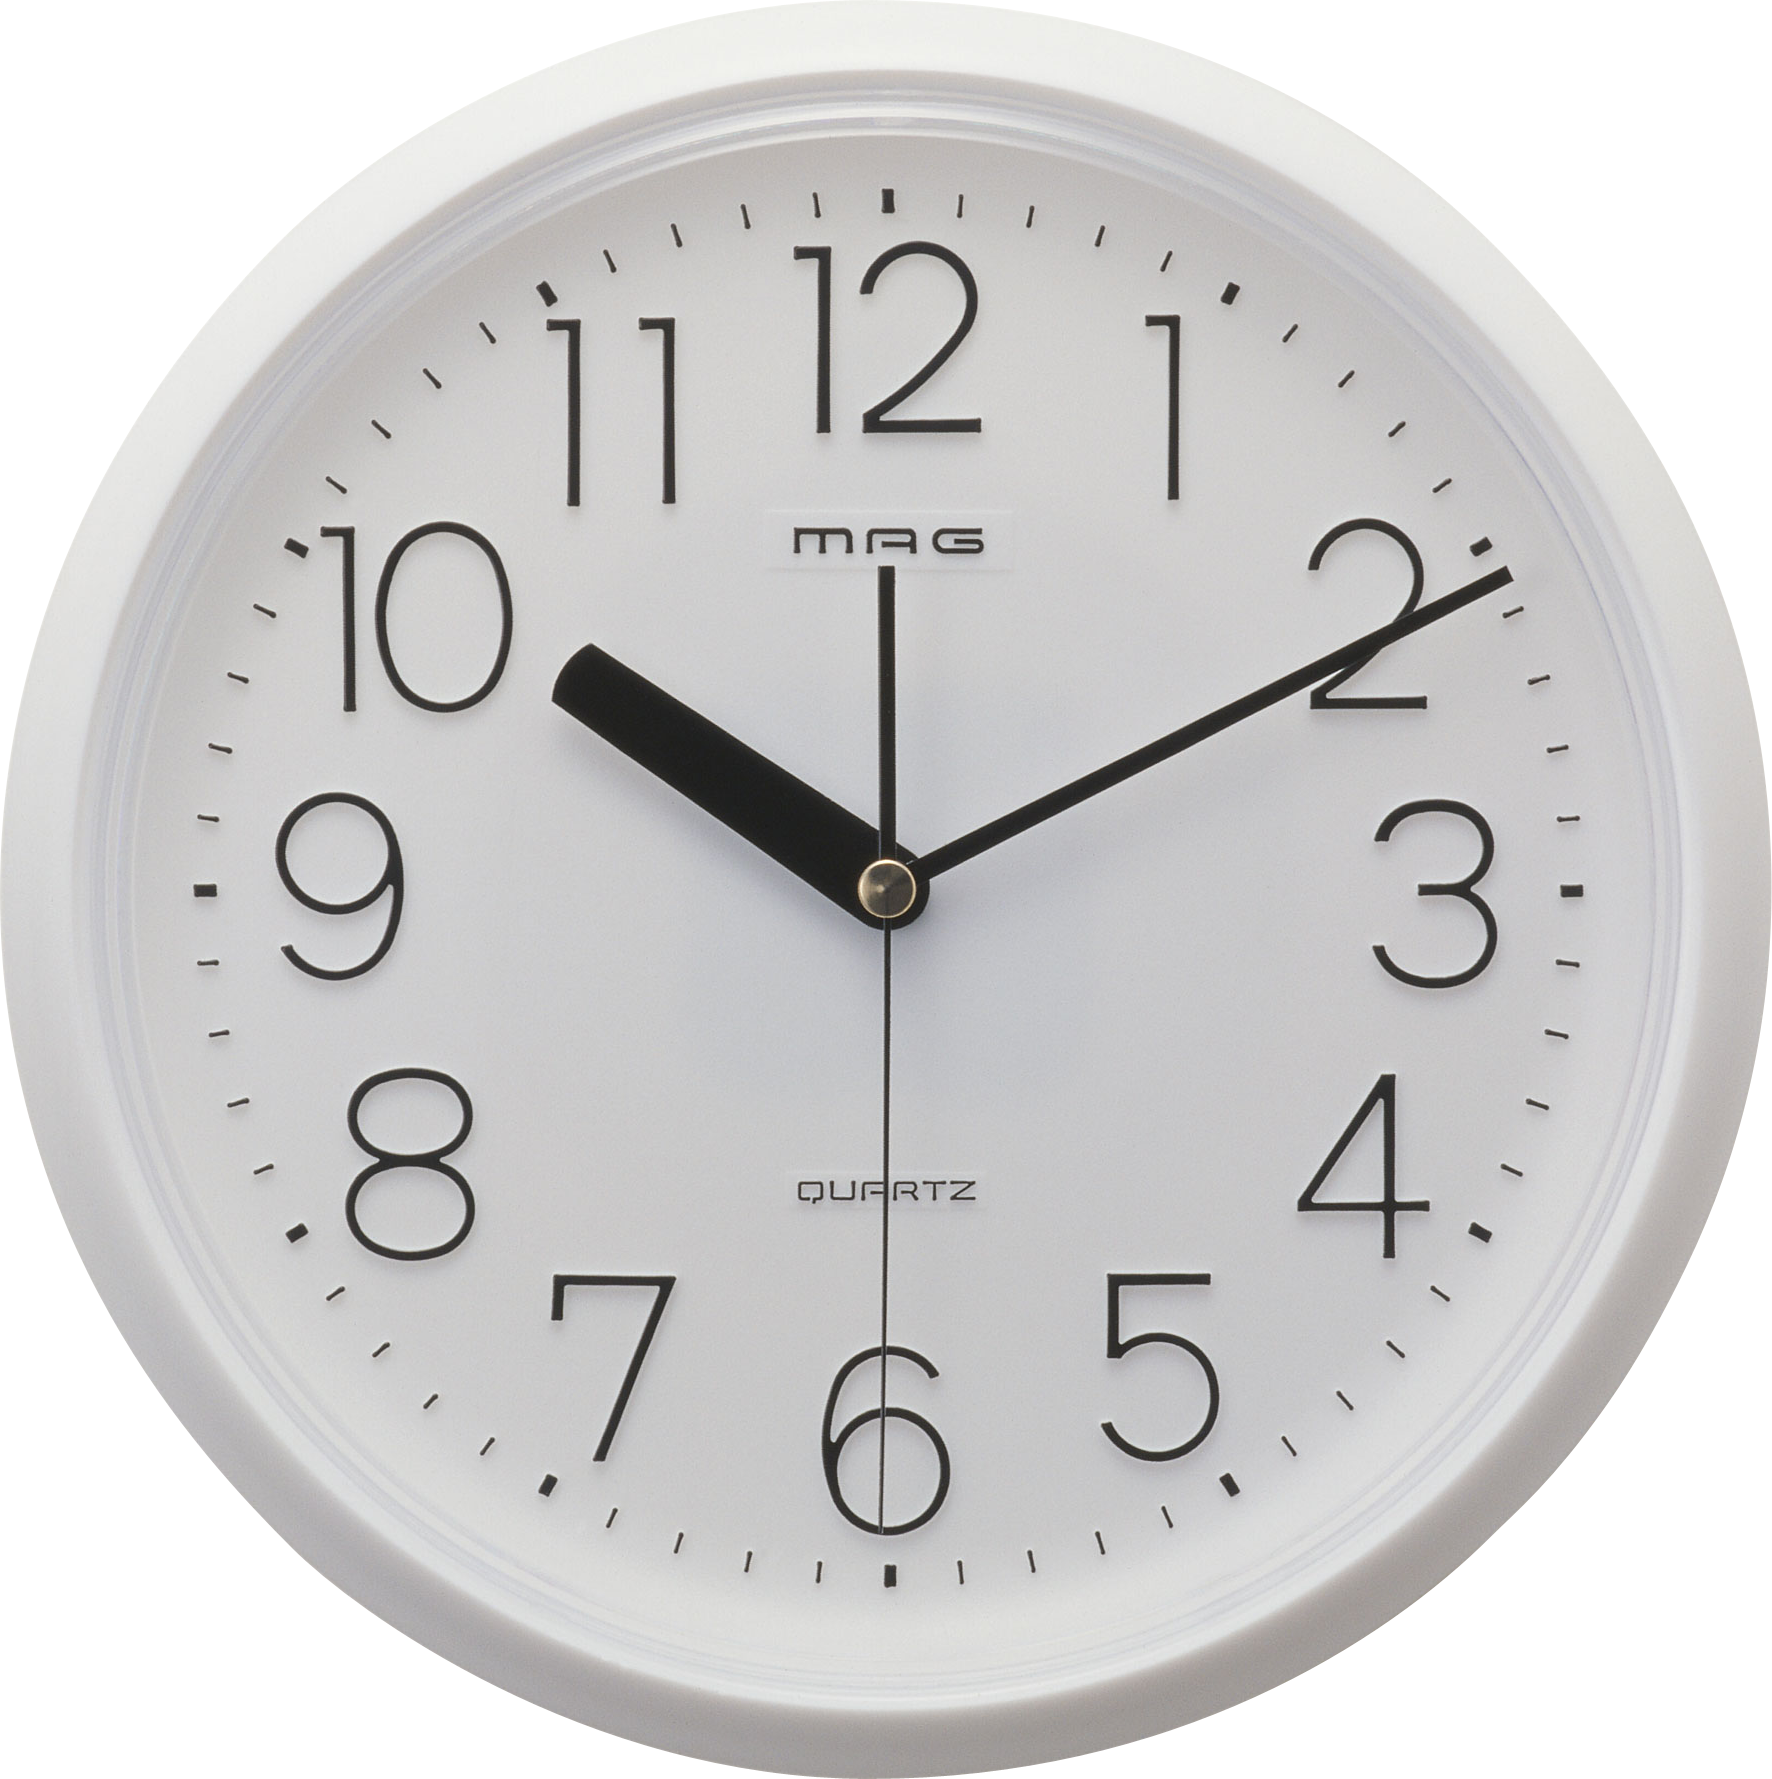 Download Wall Clock PNG Image for Free